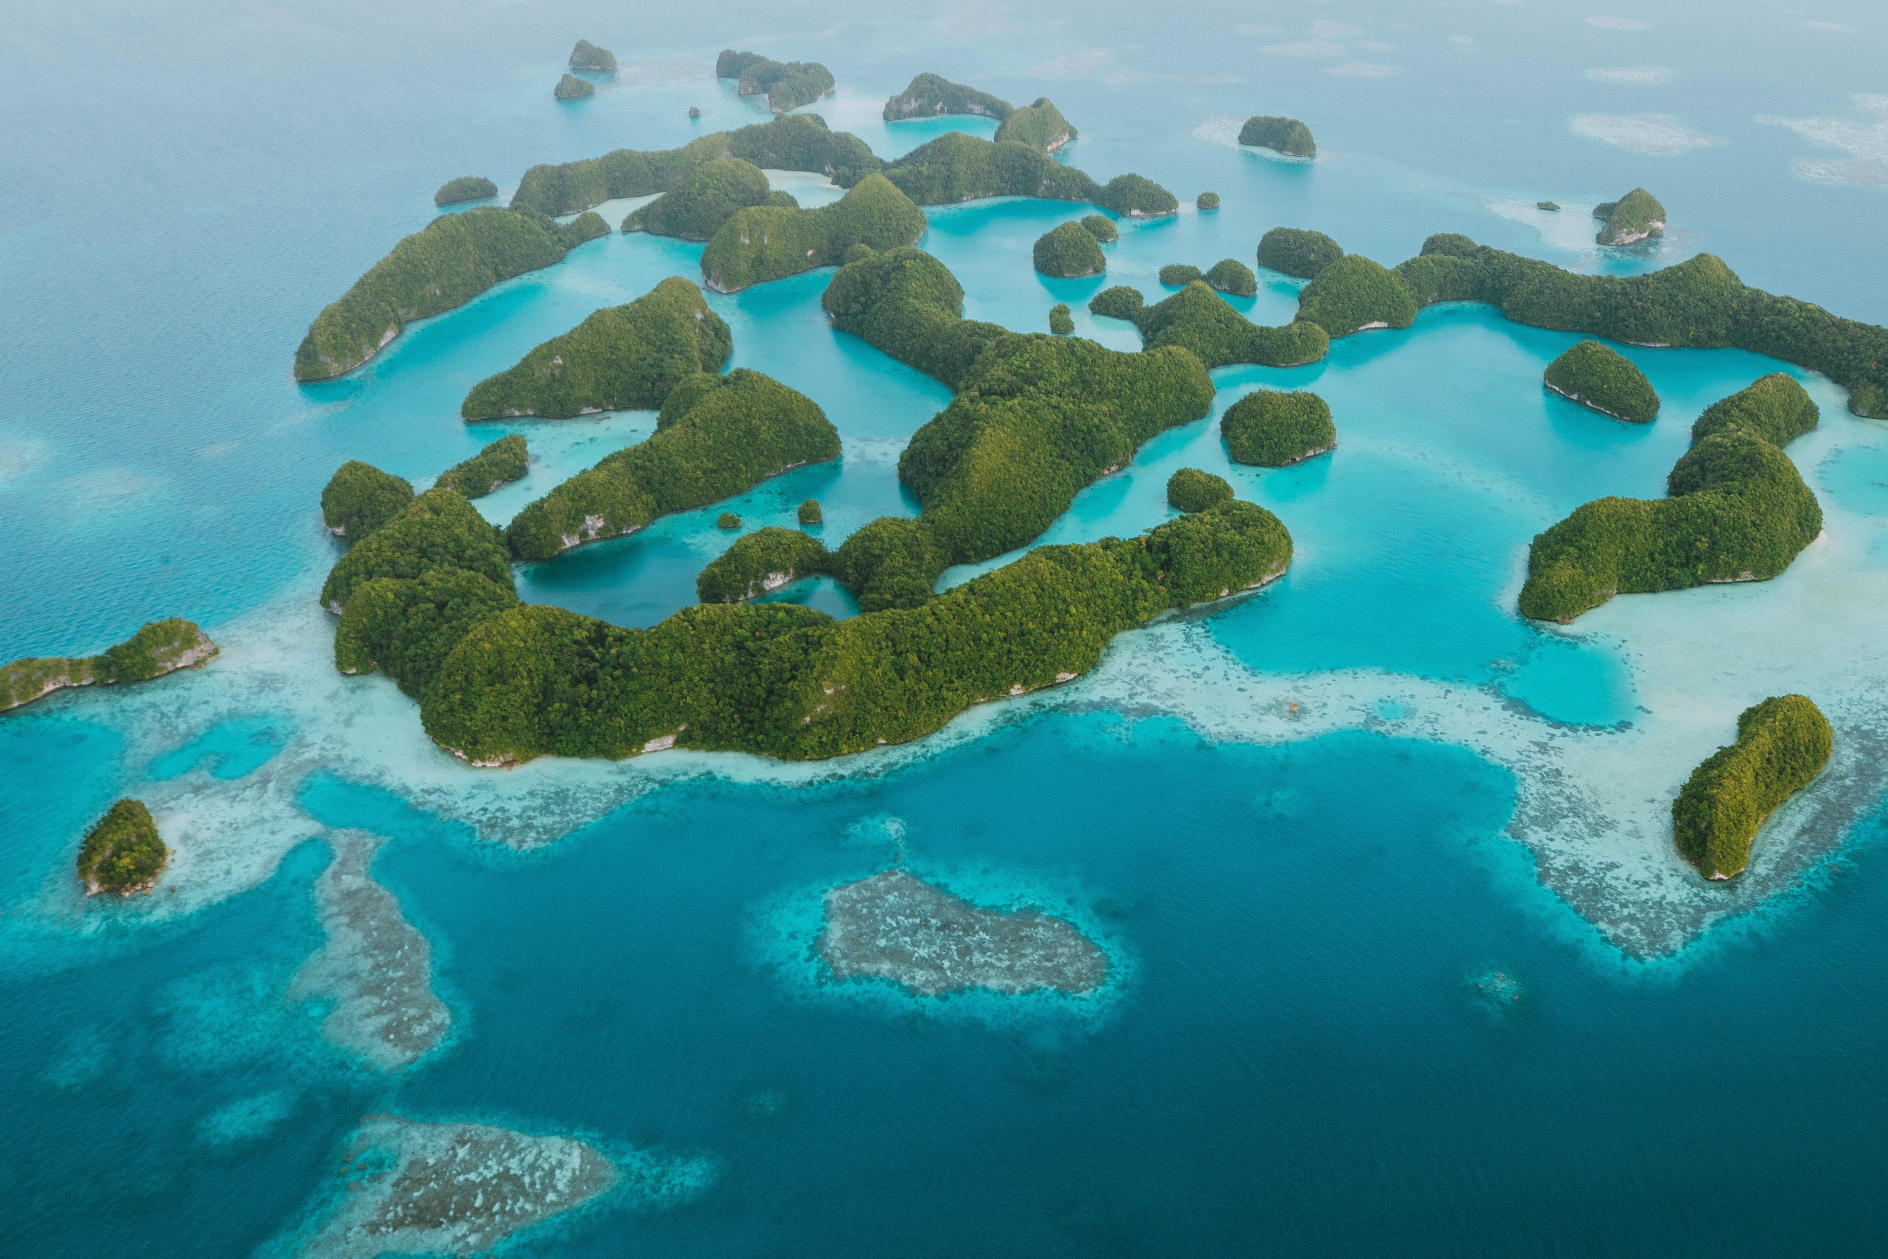 Beauty of Palau Islands. Click to enlarge.